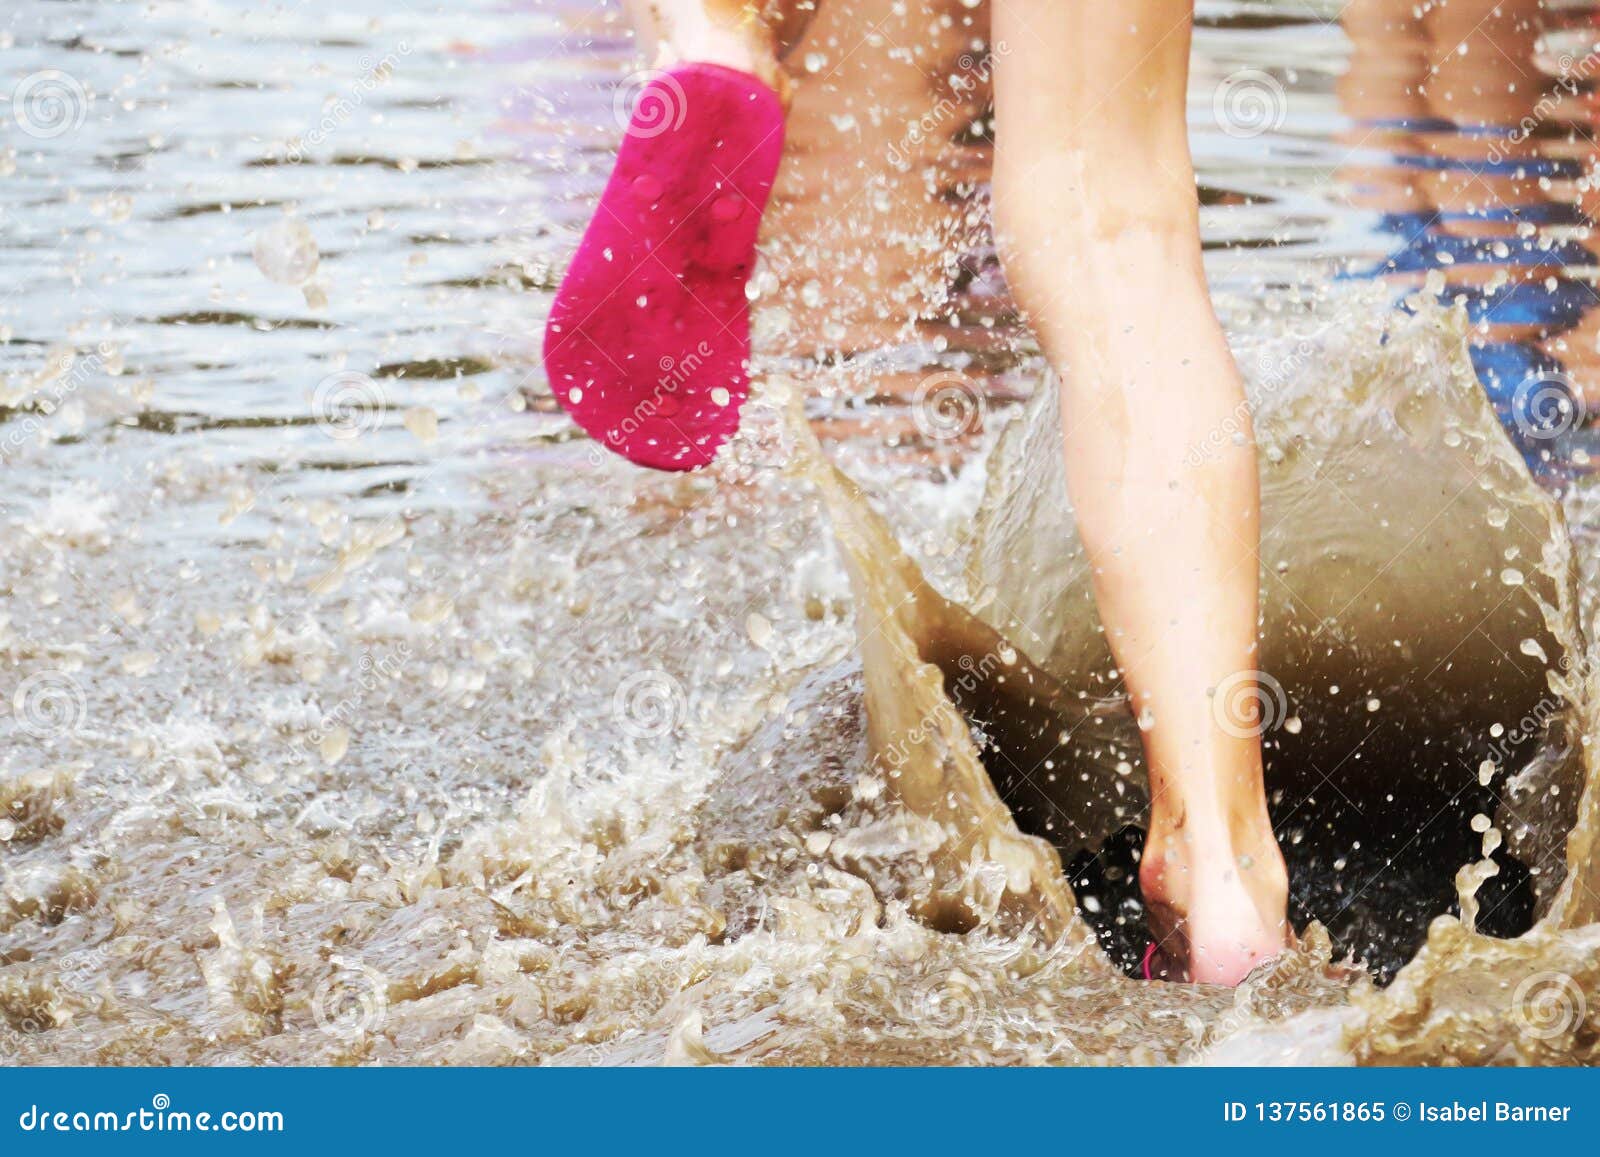 Jumping With Slippers In The Puddle Stock Image Image Of Water